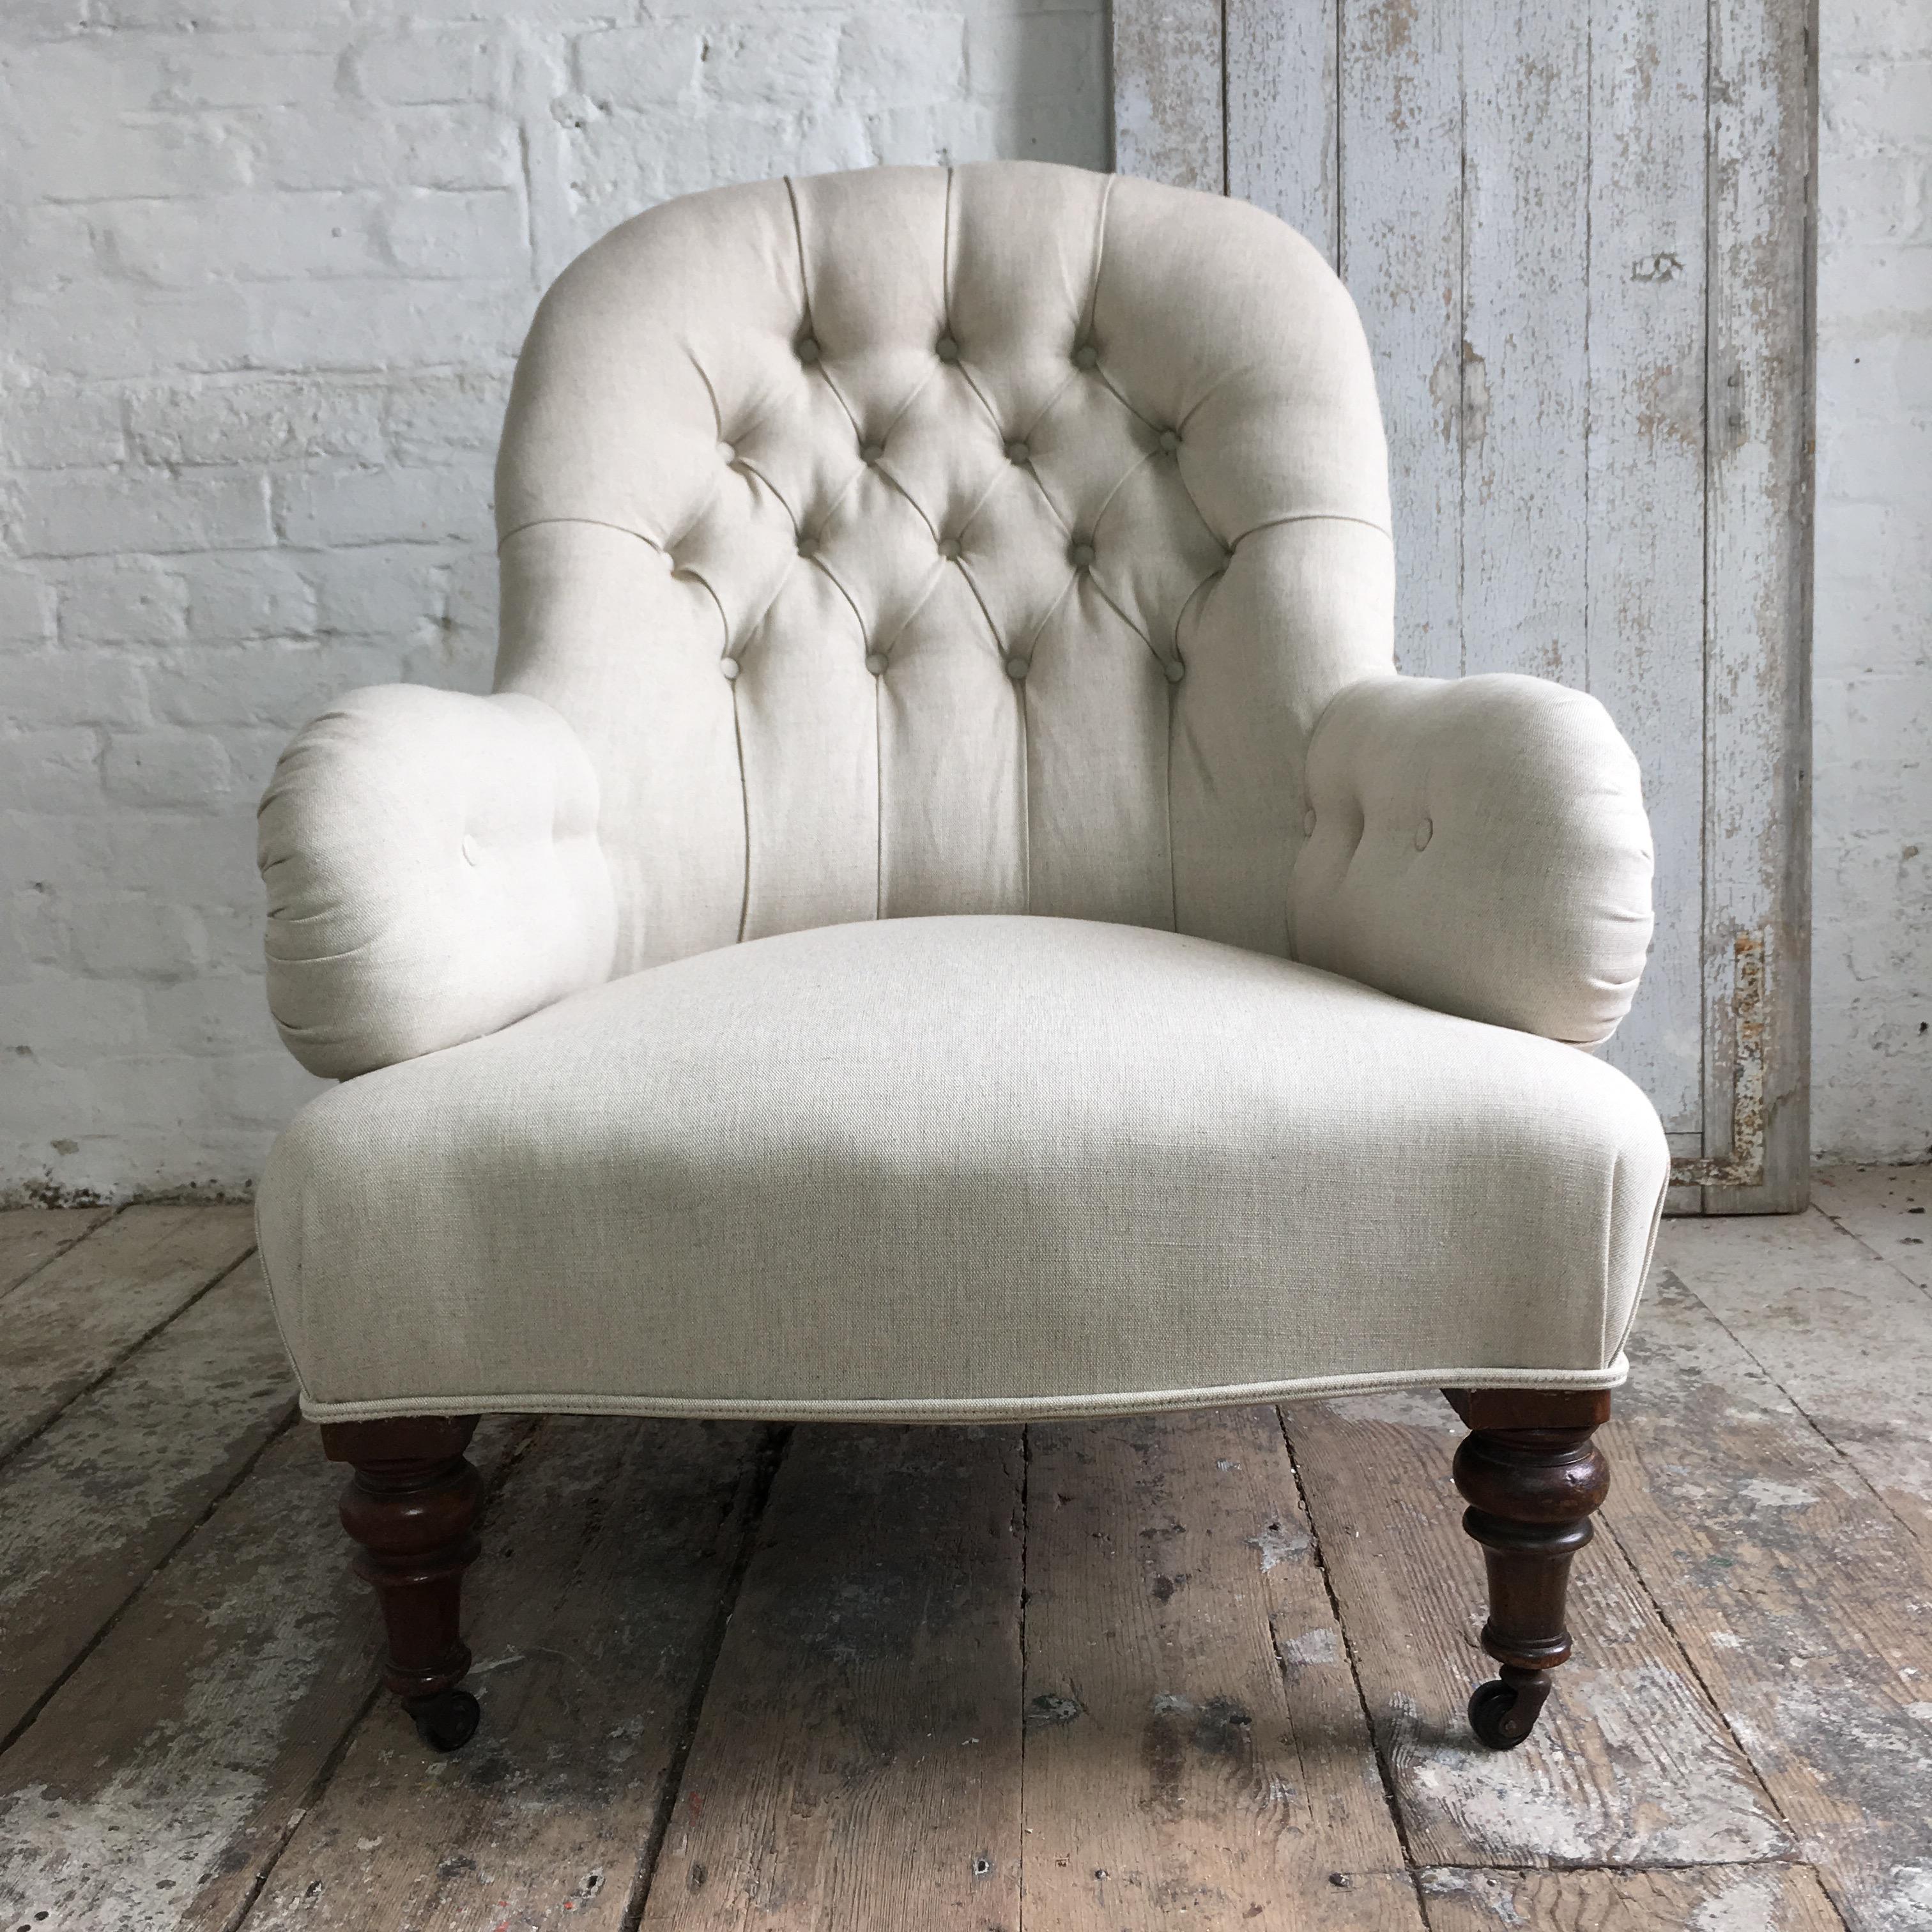 Early Victorian iron frame armchairwith button back detail. 
The chair is beautifully re-upholstered in a natural coloured linen fabric. The upholstery is brand new and completed just before listing, no use yet at all.
Turned legs at the front of